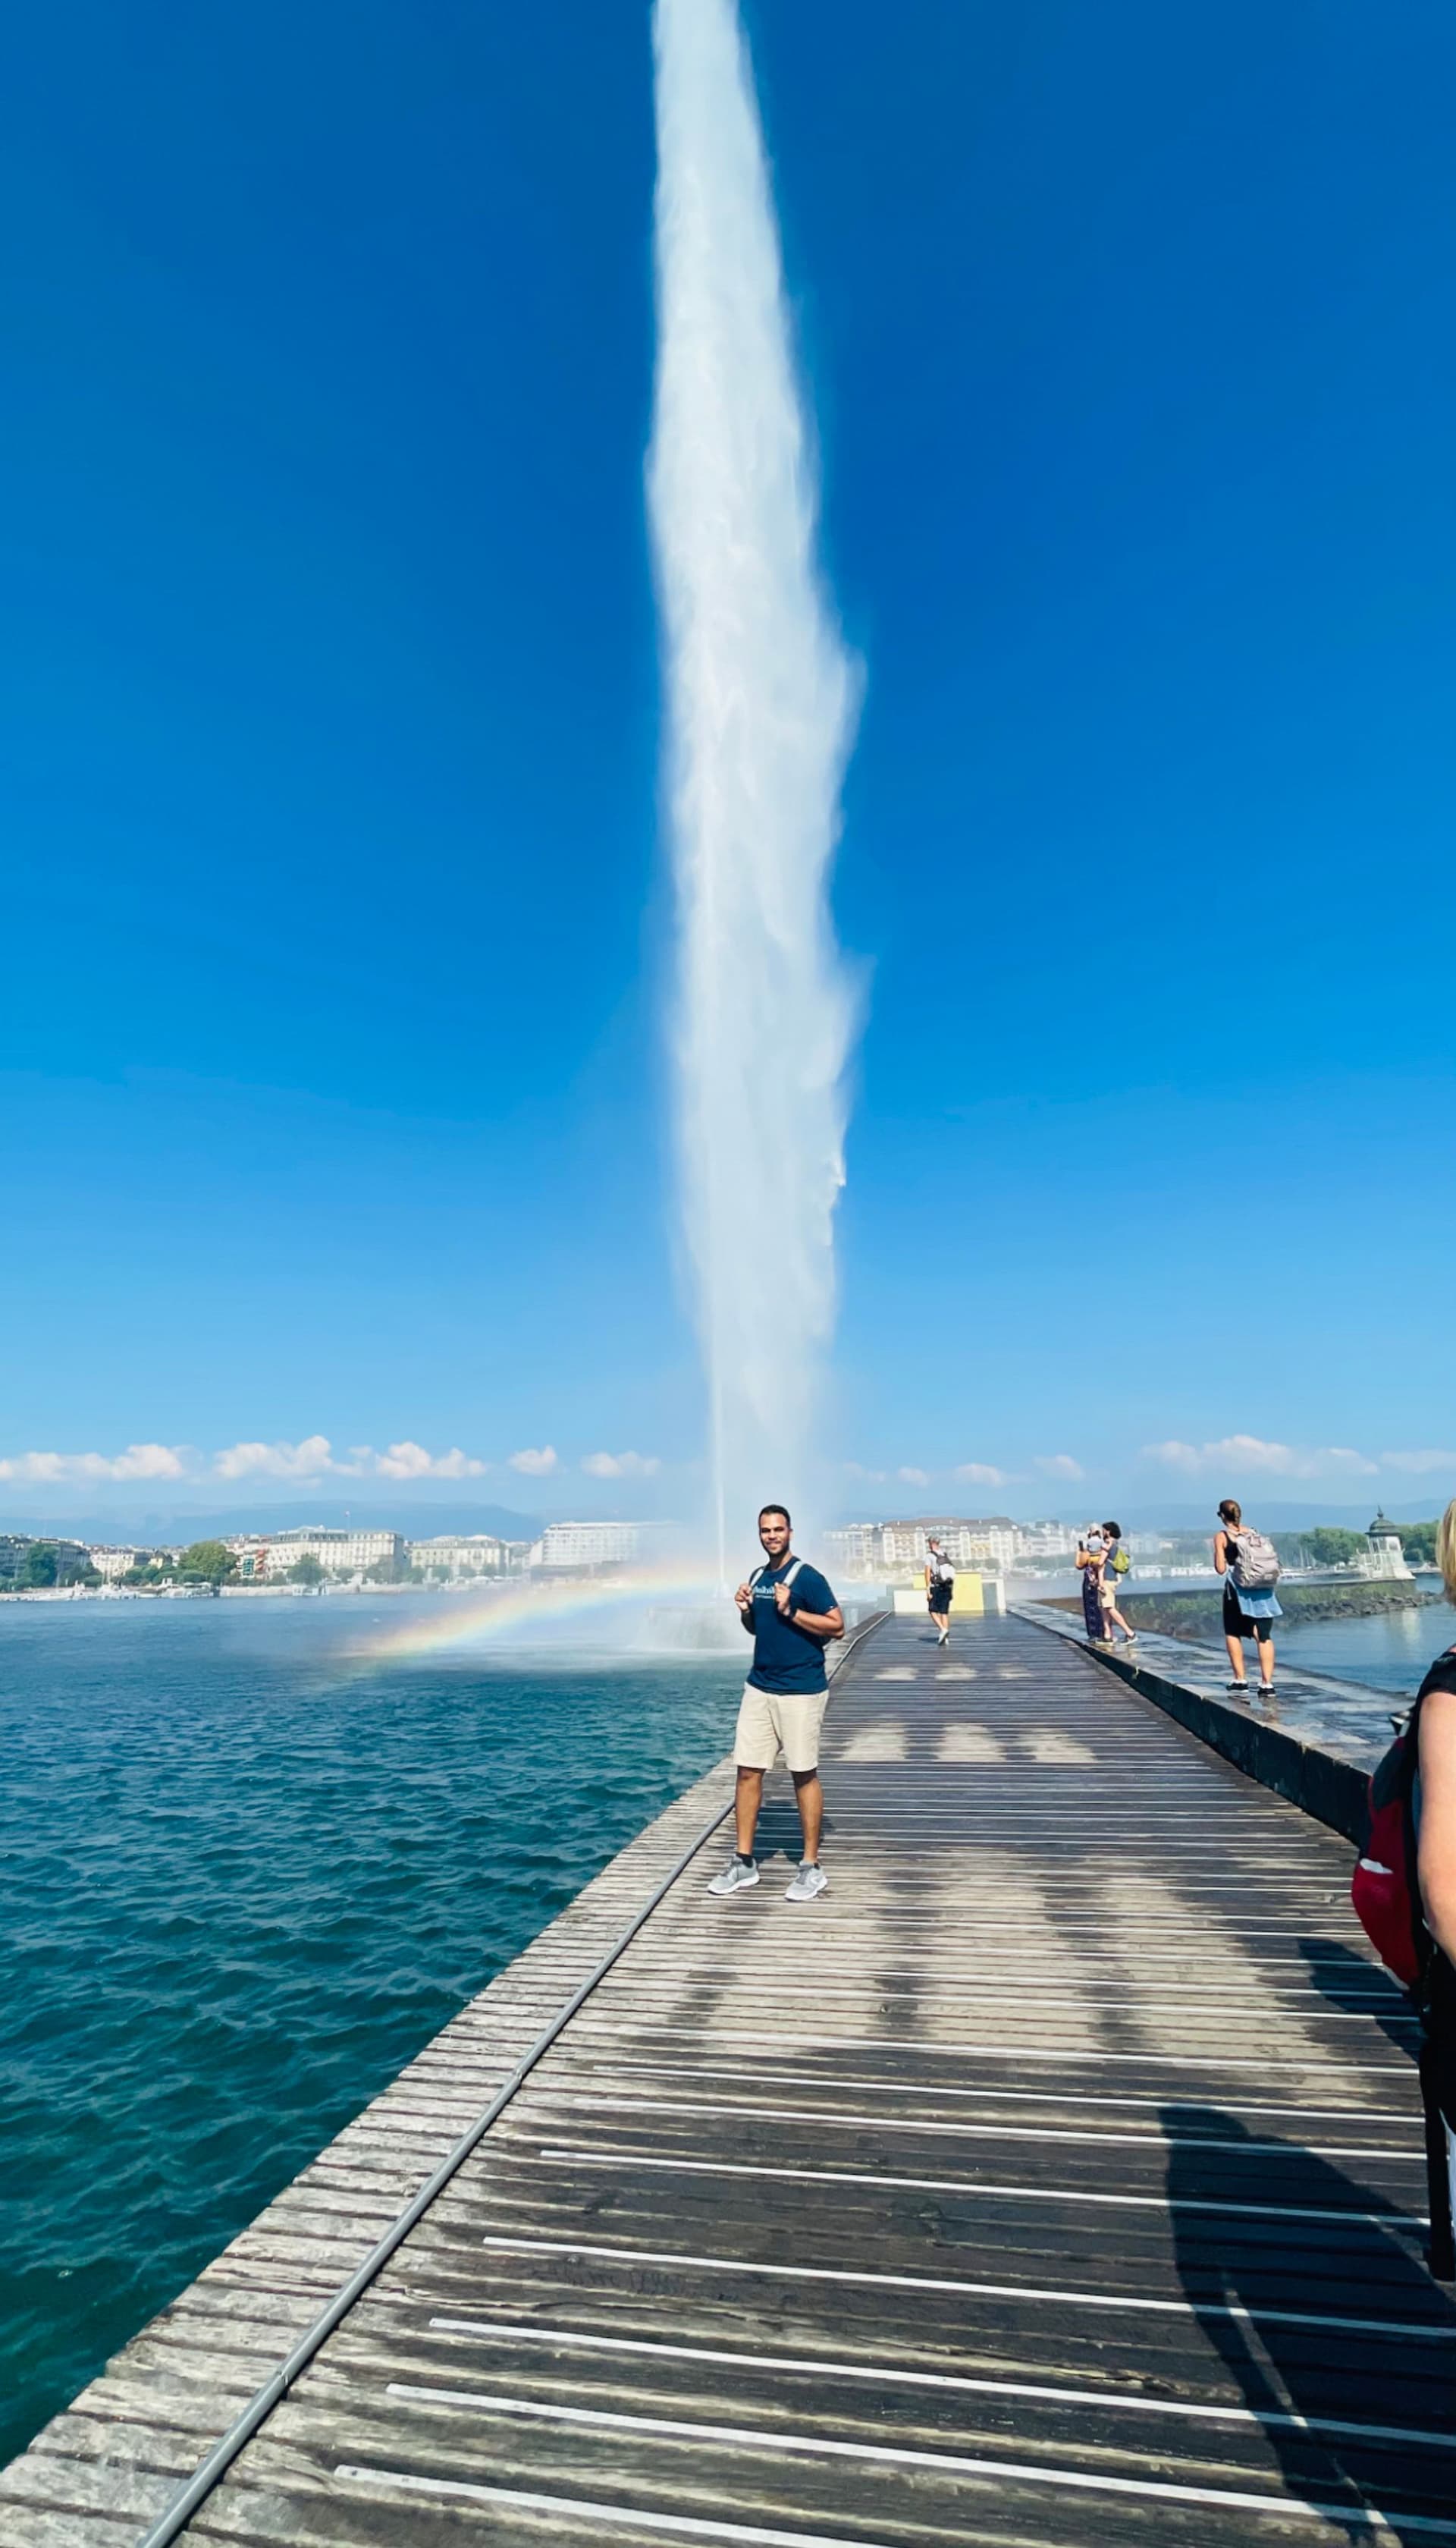 Me in front of the towering Jet D’Eau of Lake Geneva!